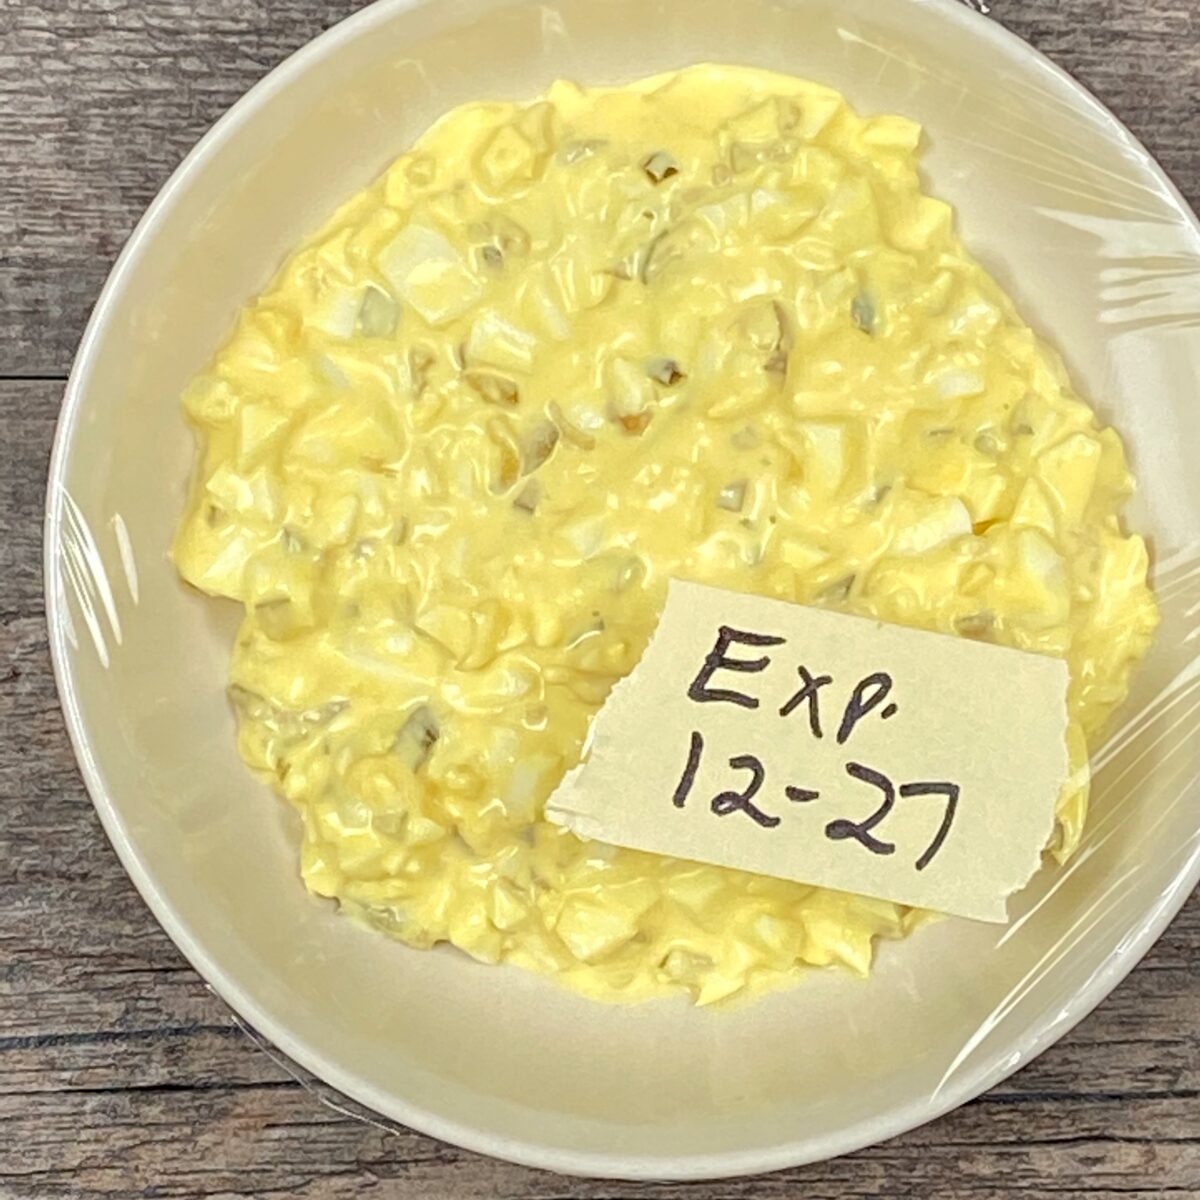 A bowl of egg salad, covered with plastic wrap, and labeled with the expiration date.